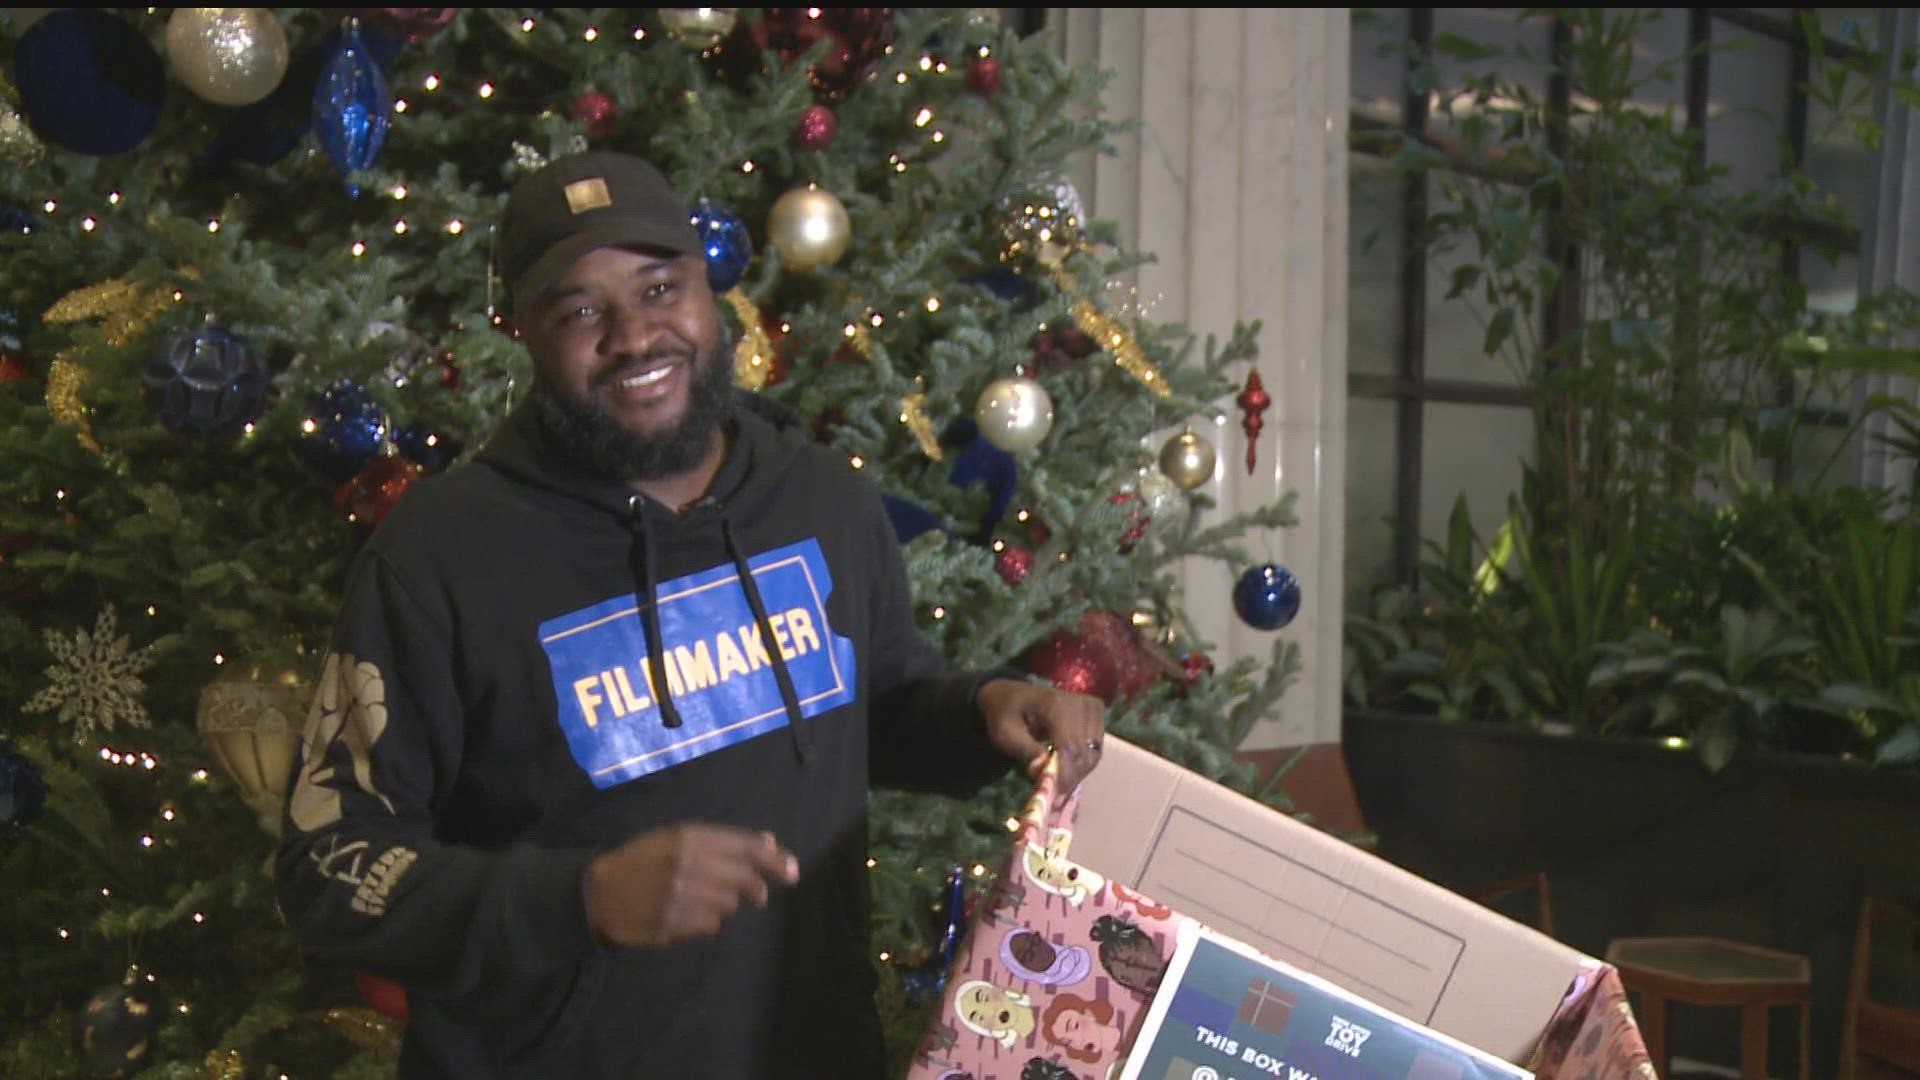 A Twin Cities filmmaker is working with the Sanneh Foundation to spread holiday cheer to BIPOC kids with a unique toy drive.